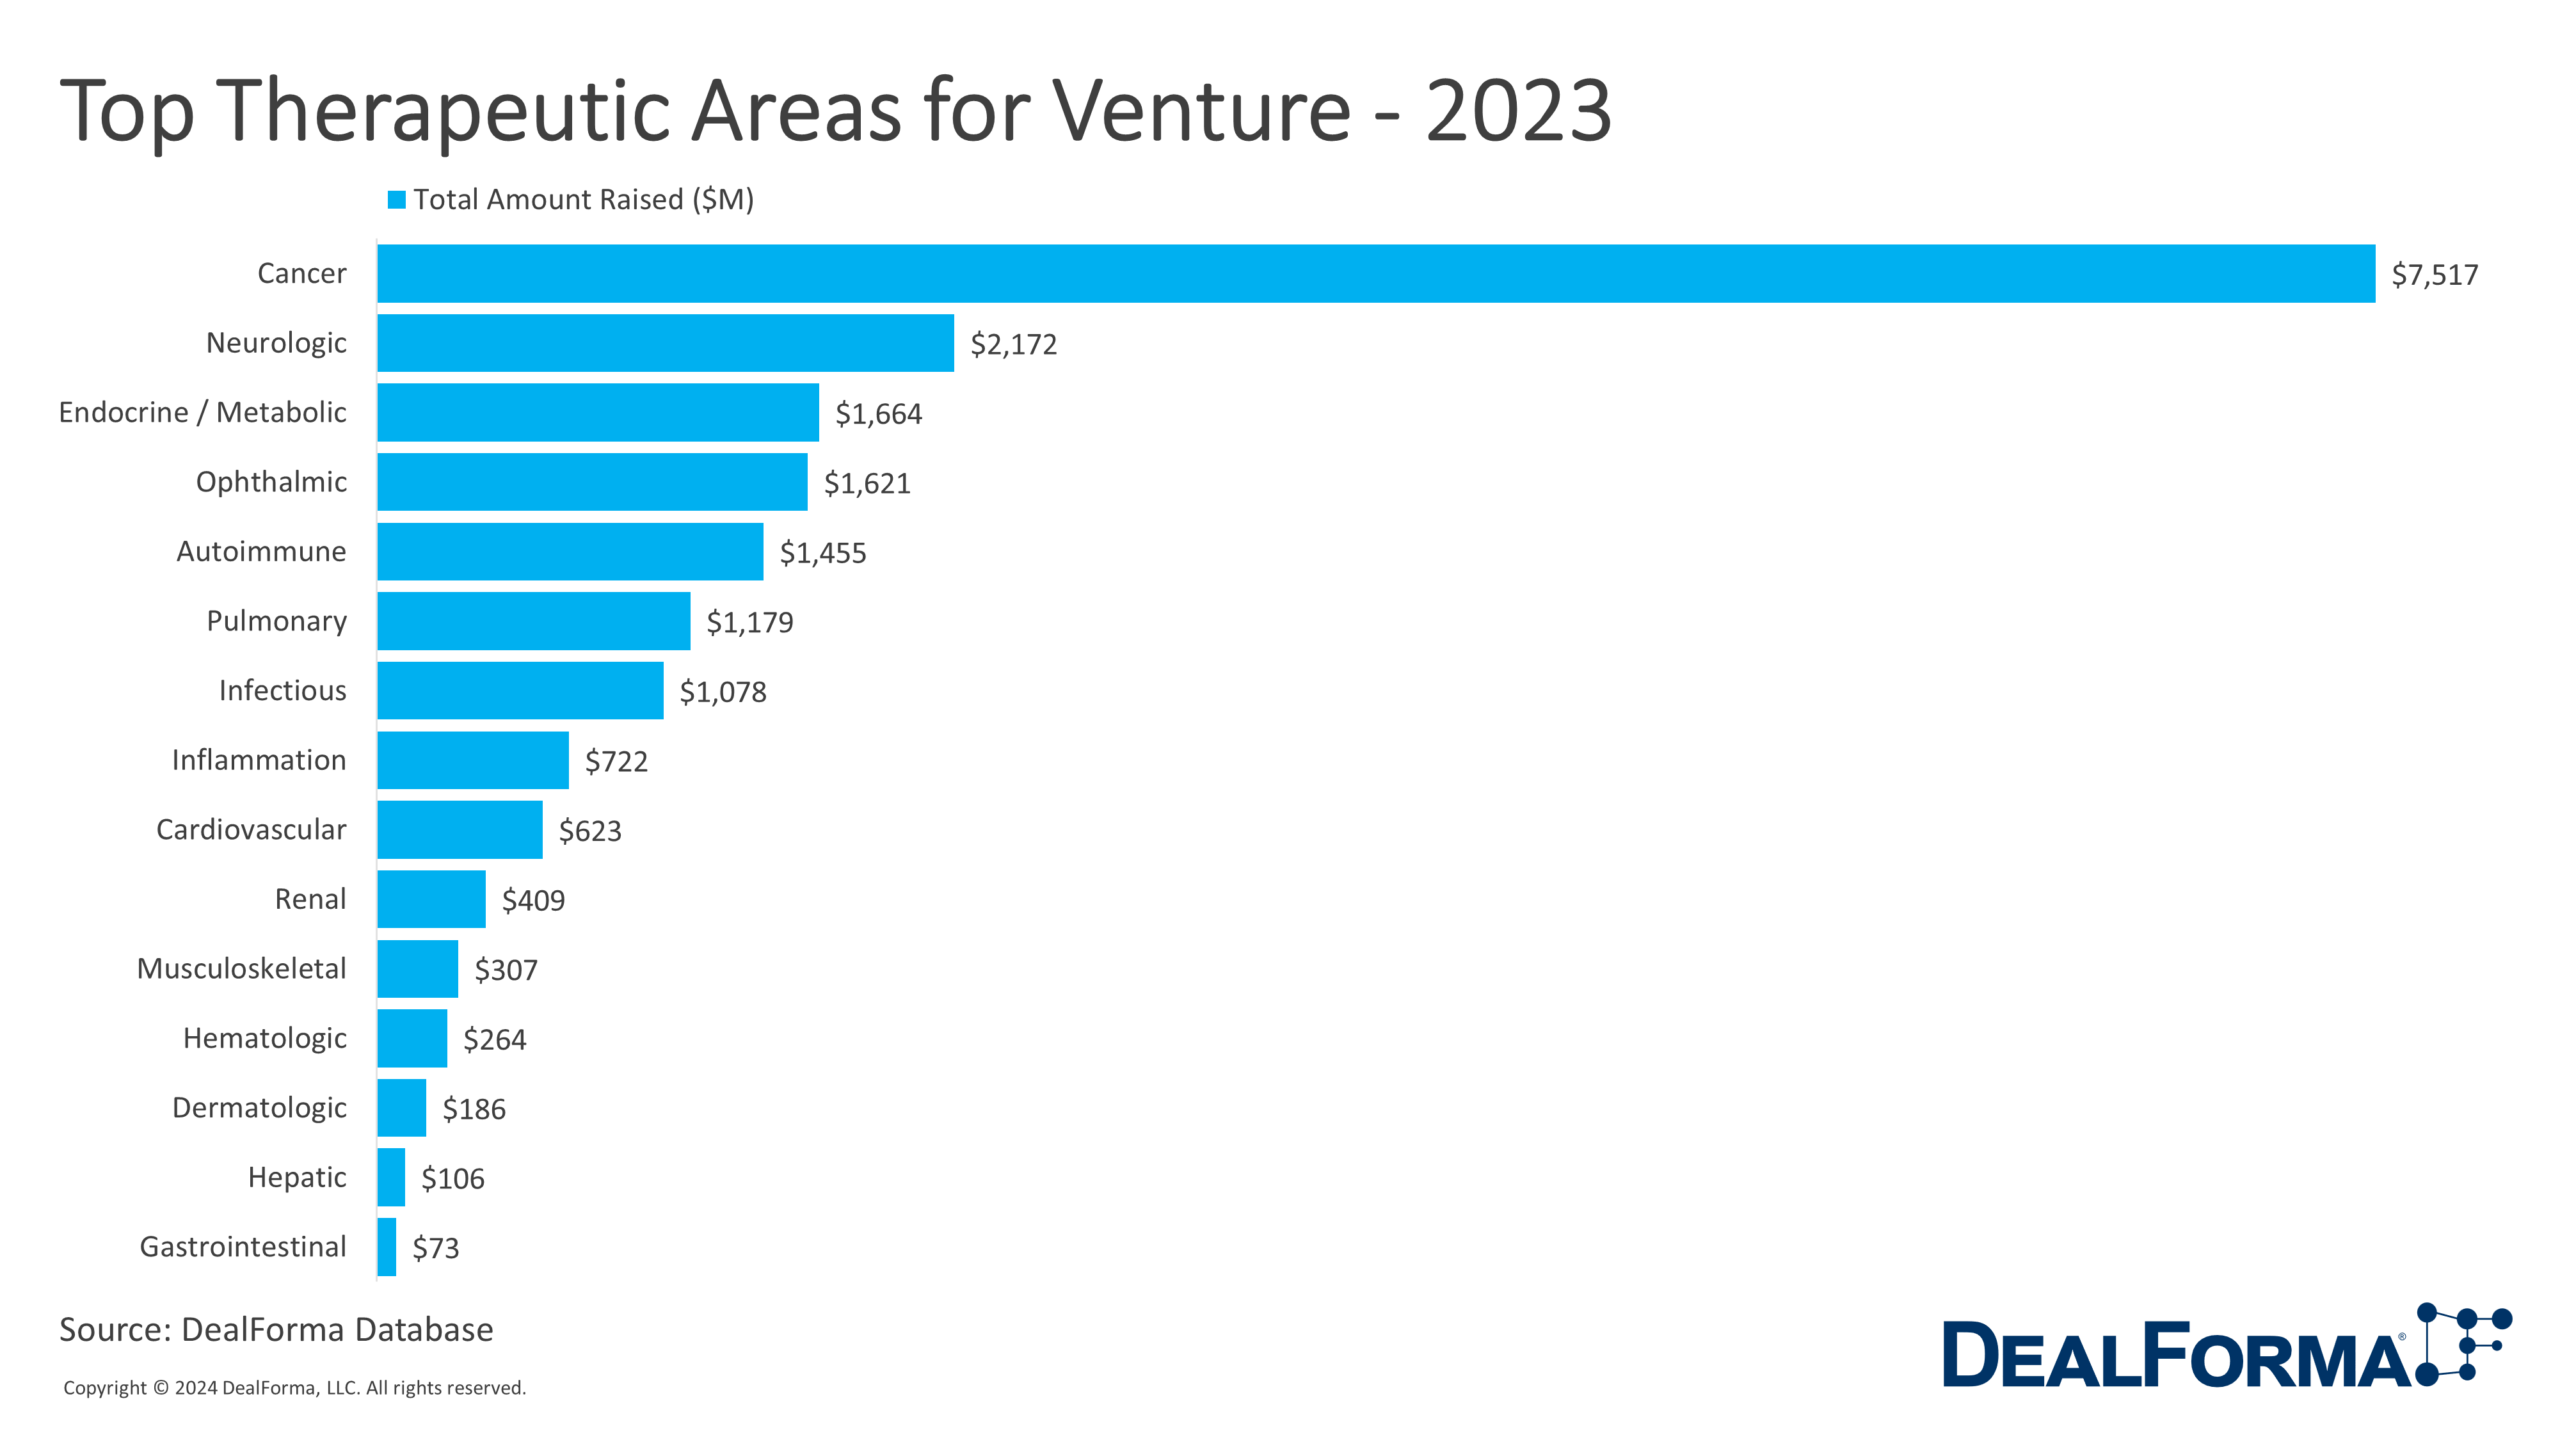 Top Therapeutic Areas for Venture - 2023